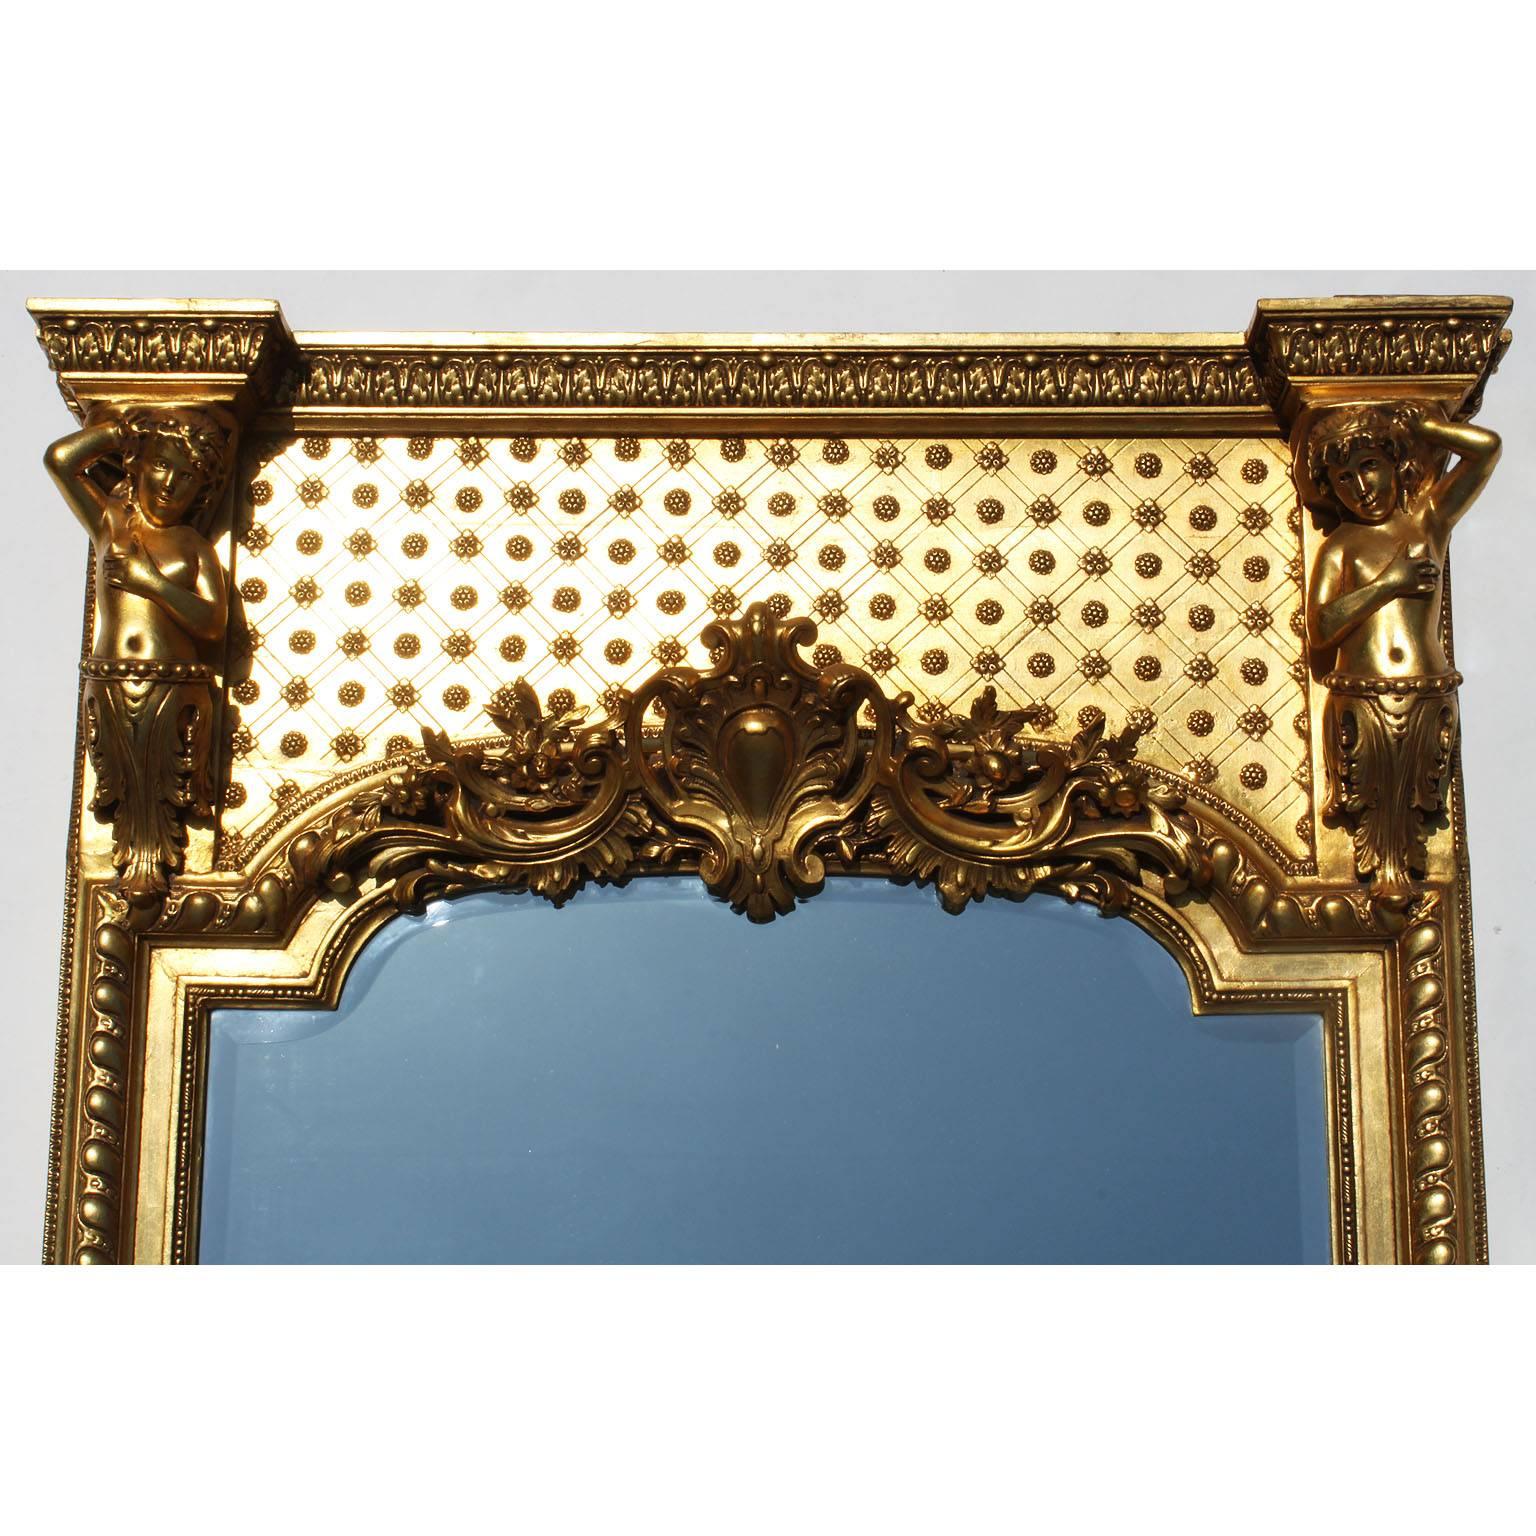 A French Belle Époque giltwood and Gesso carved figural trumeau mirror. The elongated frame surmounted on each side by an allegorical Putto and centered with a center floral shield with scrolled acanthus branches, the mirror plate is beveled, Paris,